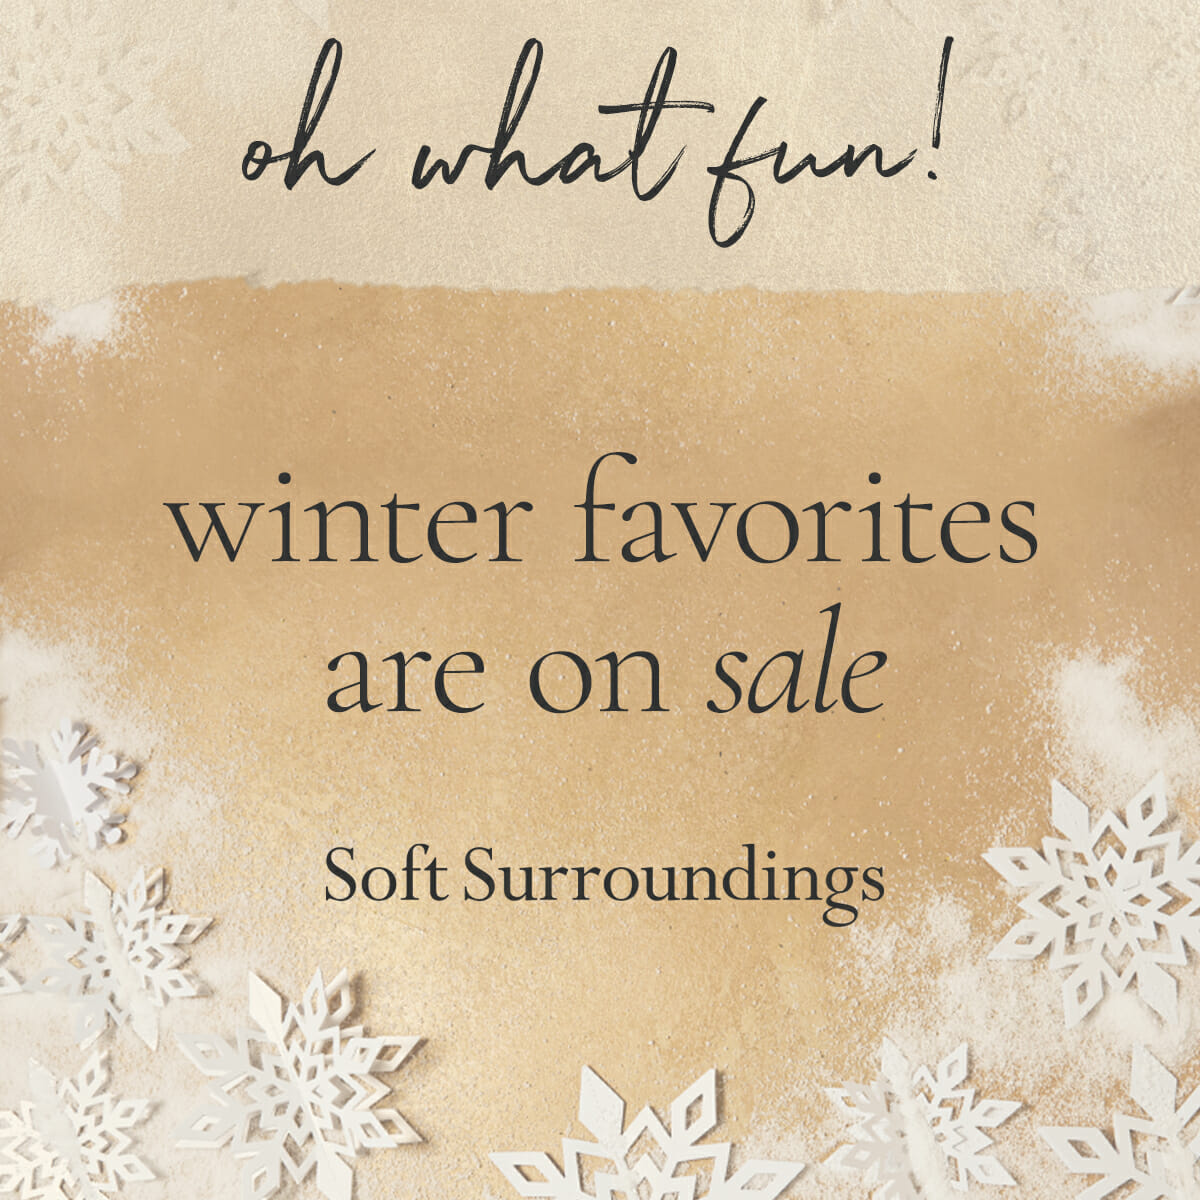 oh what fun! winter favorites are on sale.